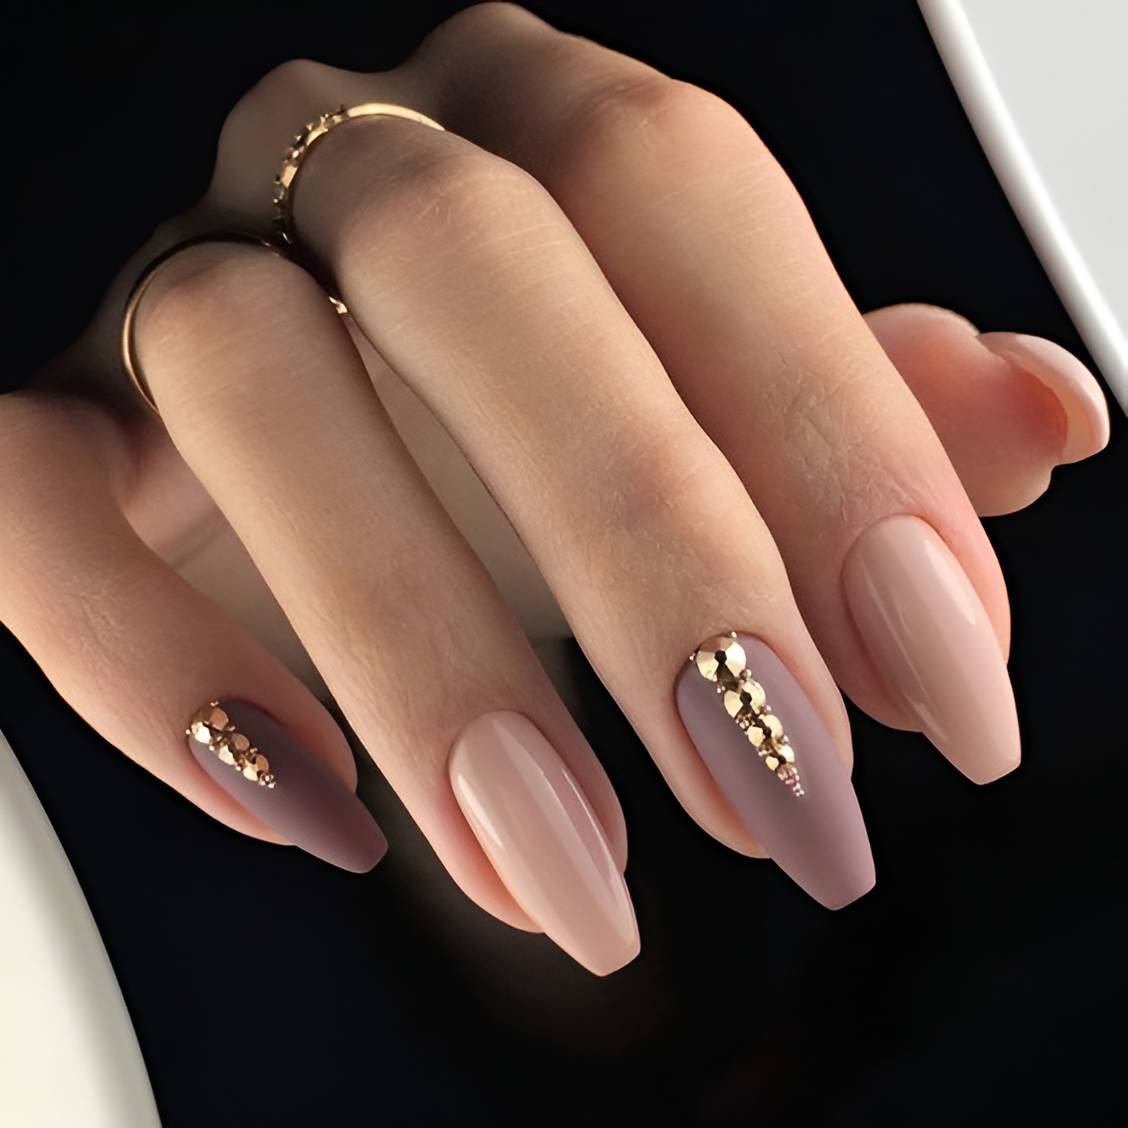 30 Gorgeous Prom Nail Designs Every Girl Needs To Copy - 207